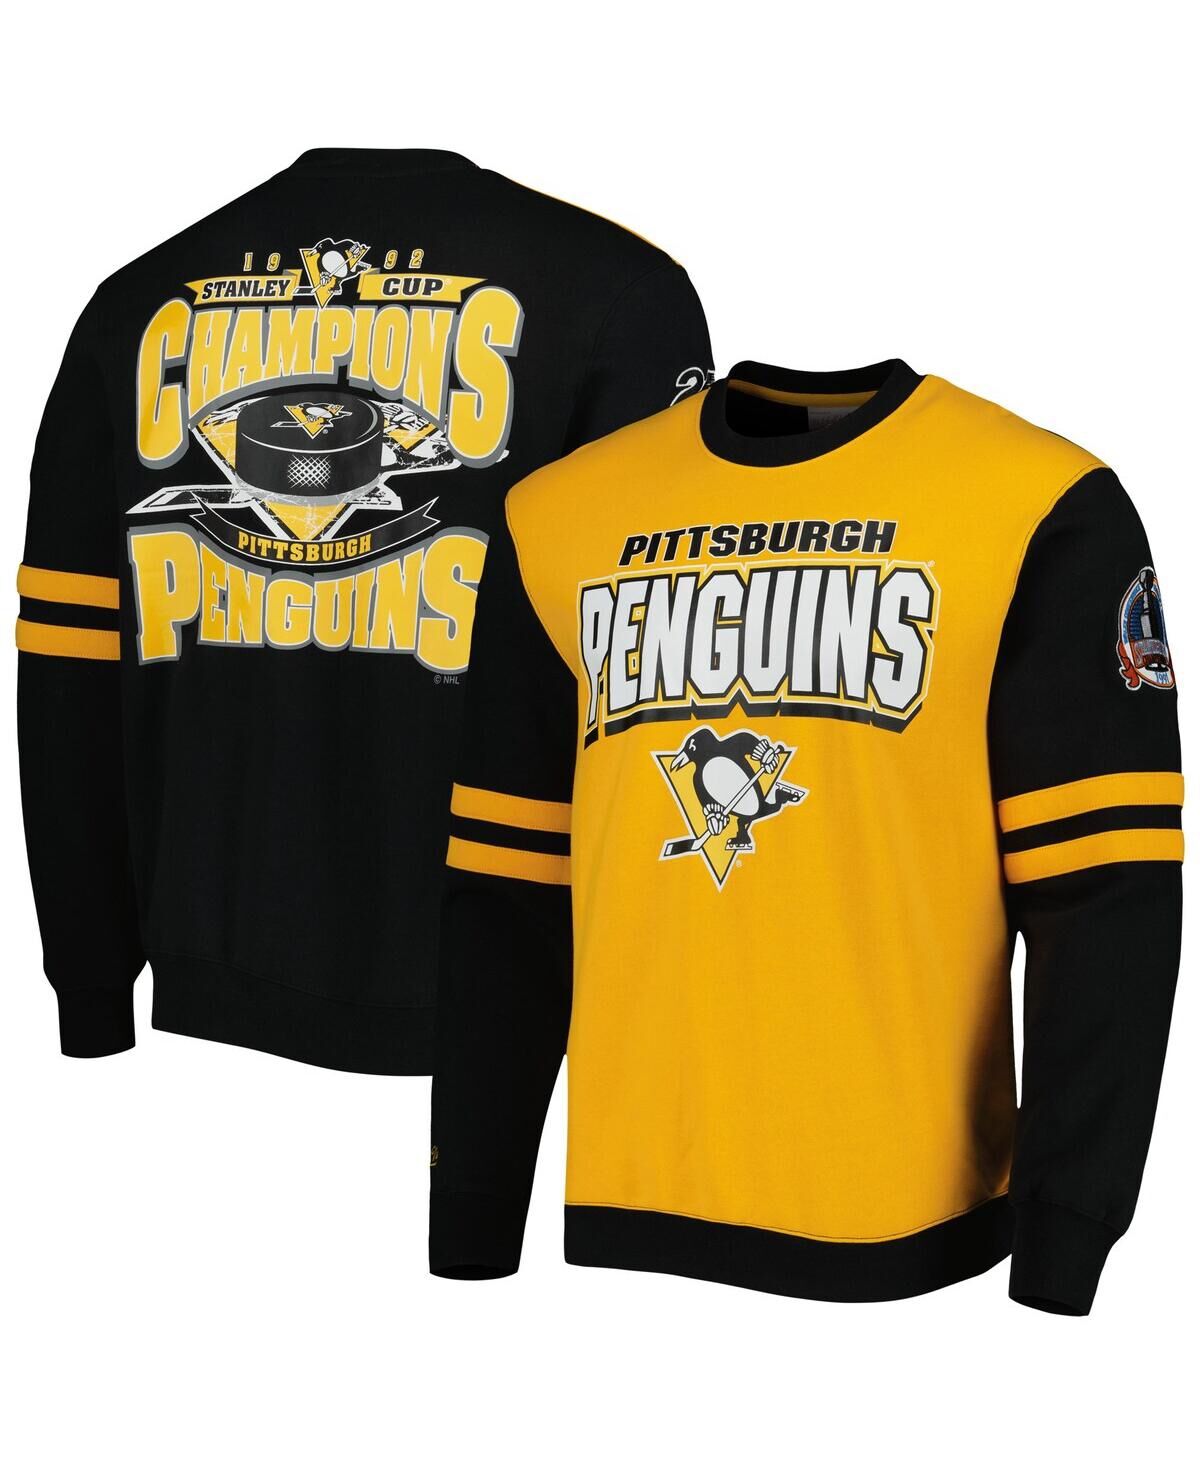 Mitchell & Ness Men's Mitchell & Ness Gold, Black Pittsburgh Penguins 1992 Stanley Cup Champions Pullover Sweatshirt - Gold, Black